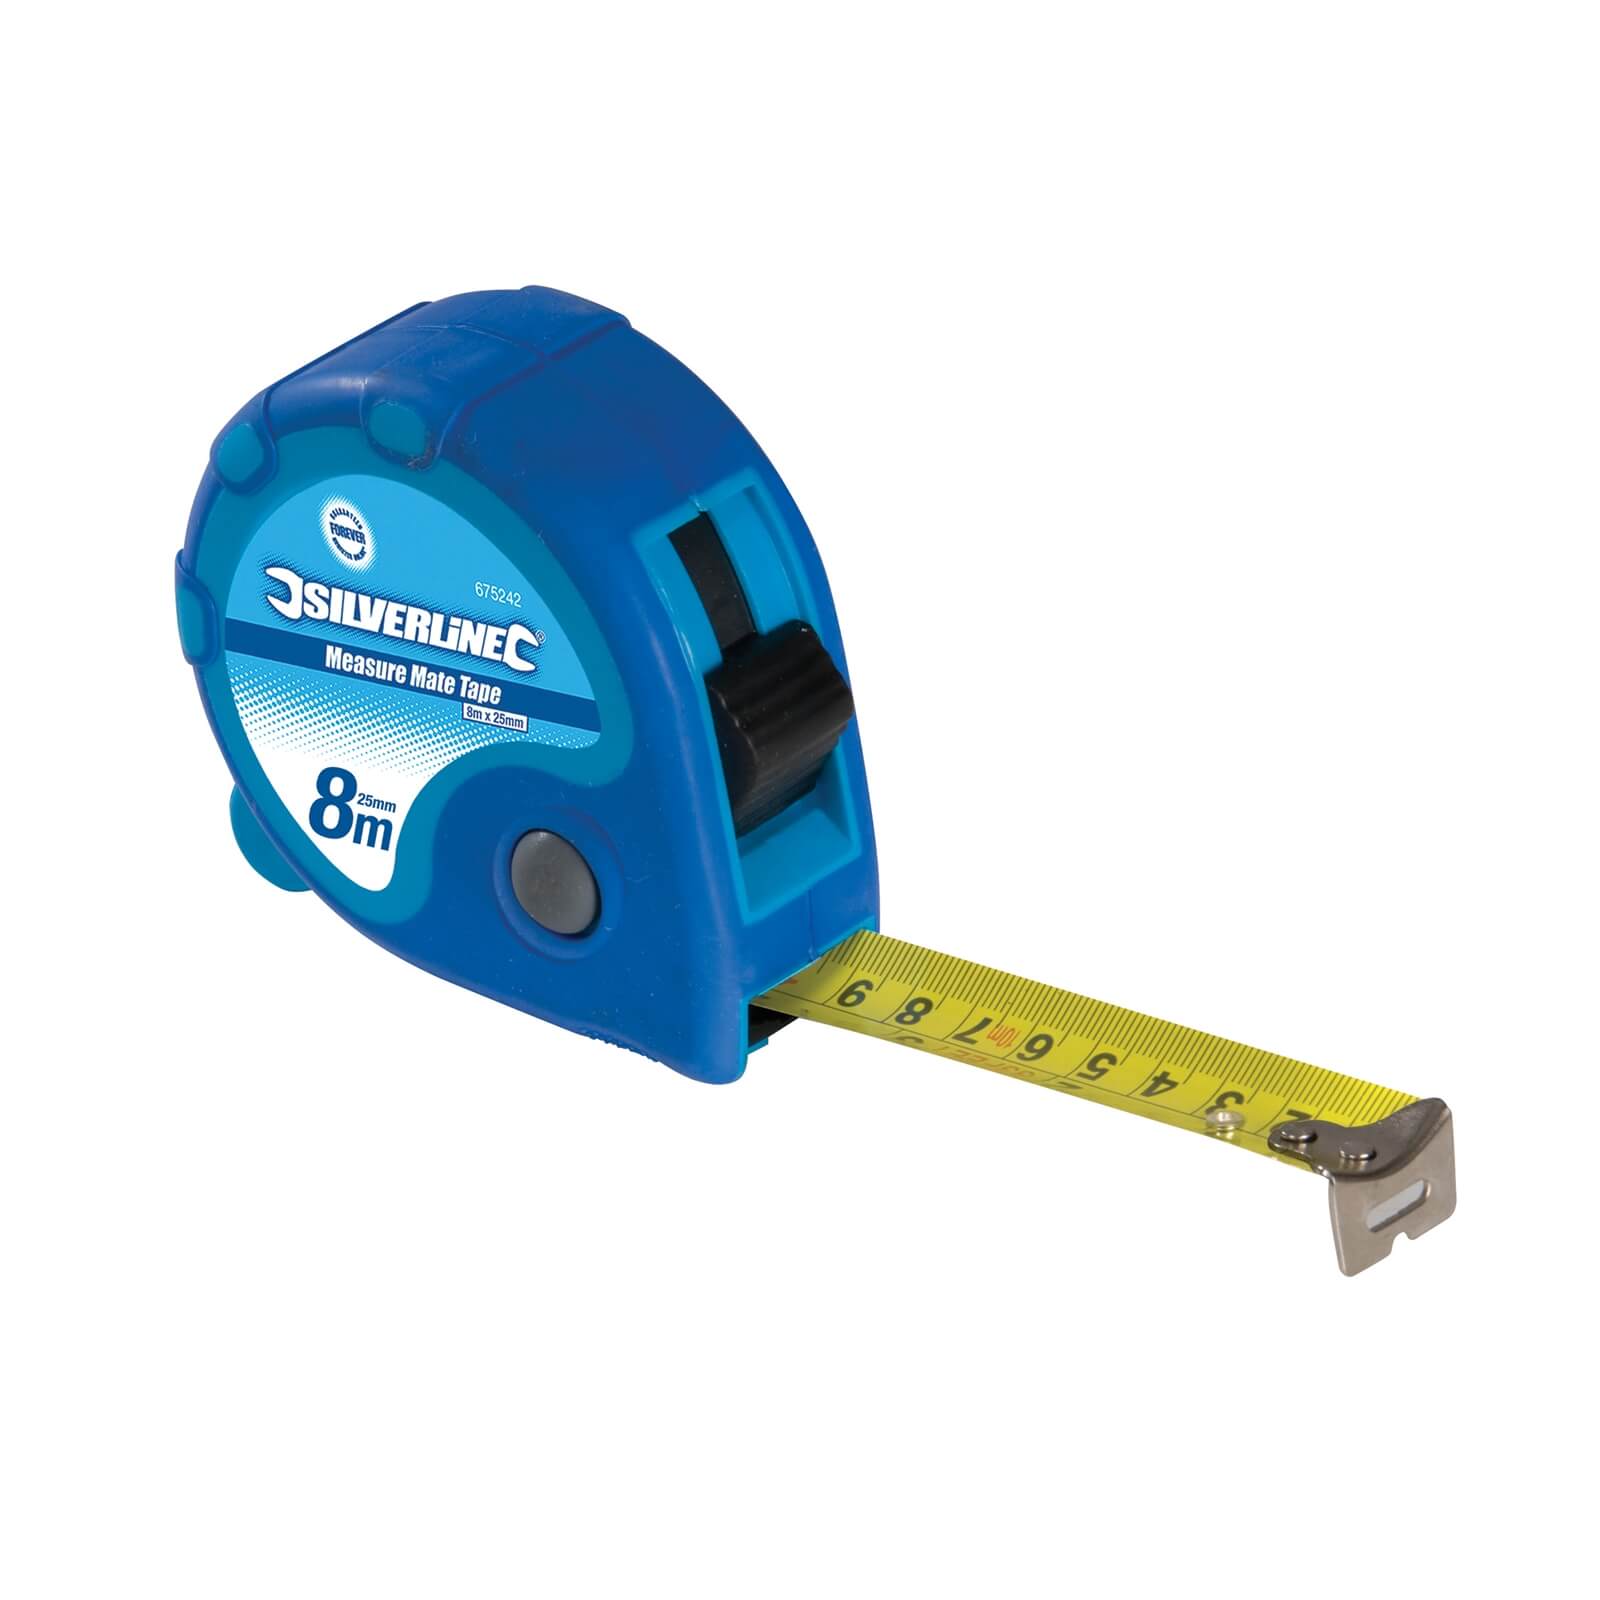 Silverline Measure Mate Tape 8m / 26ft x 25mm